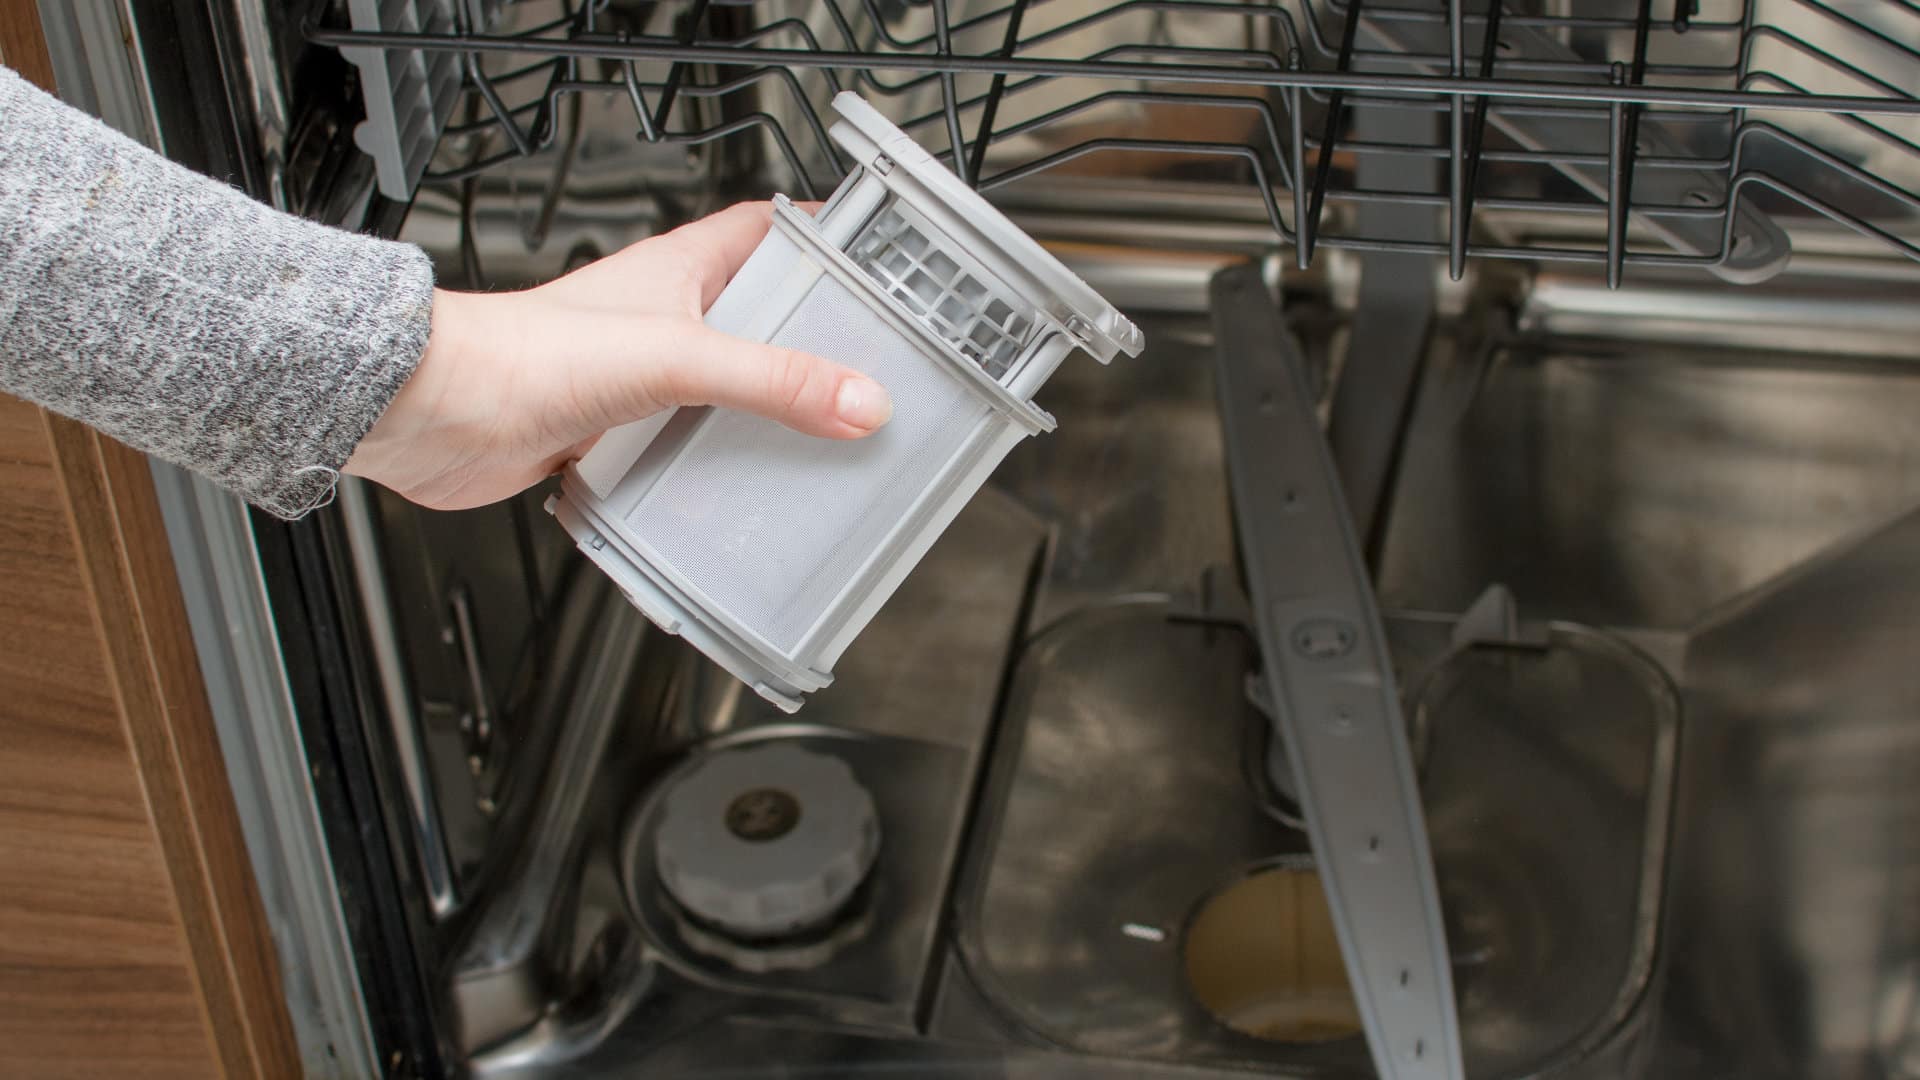 Featured image for “5 Ways to Unclog a Dishwasher”